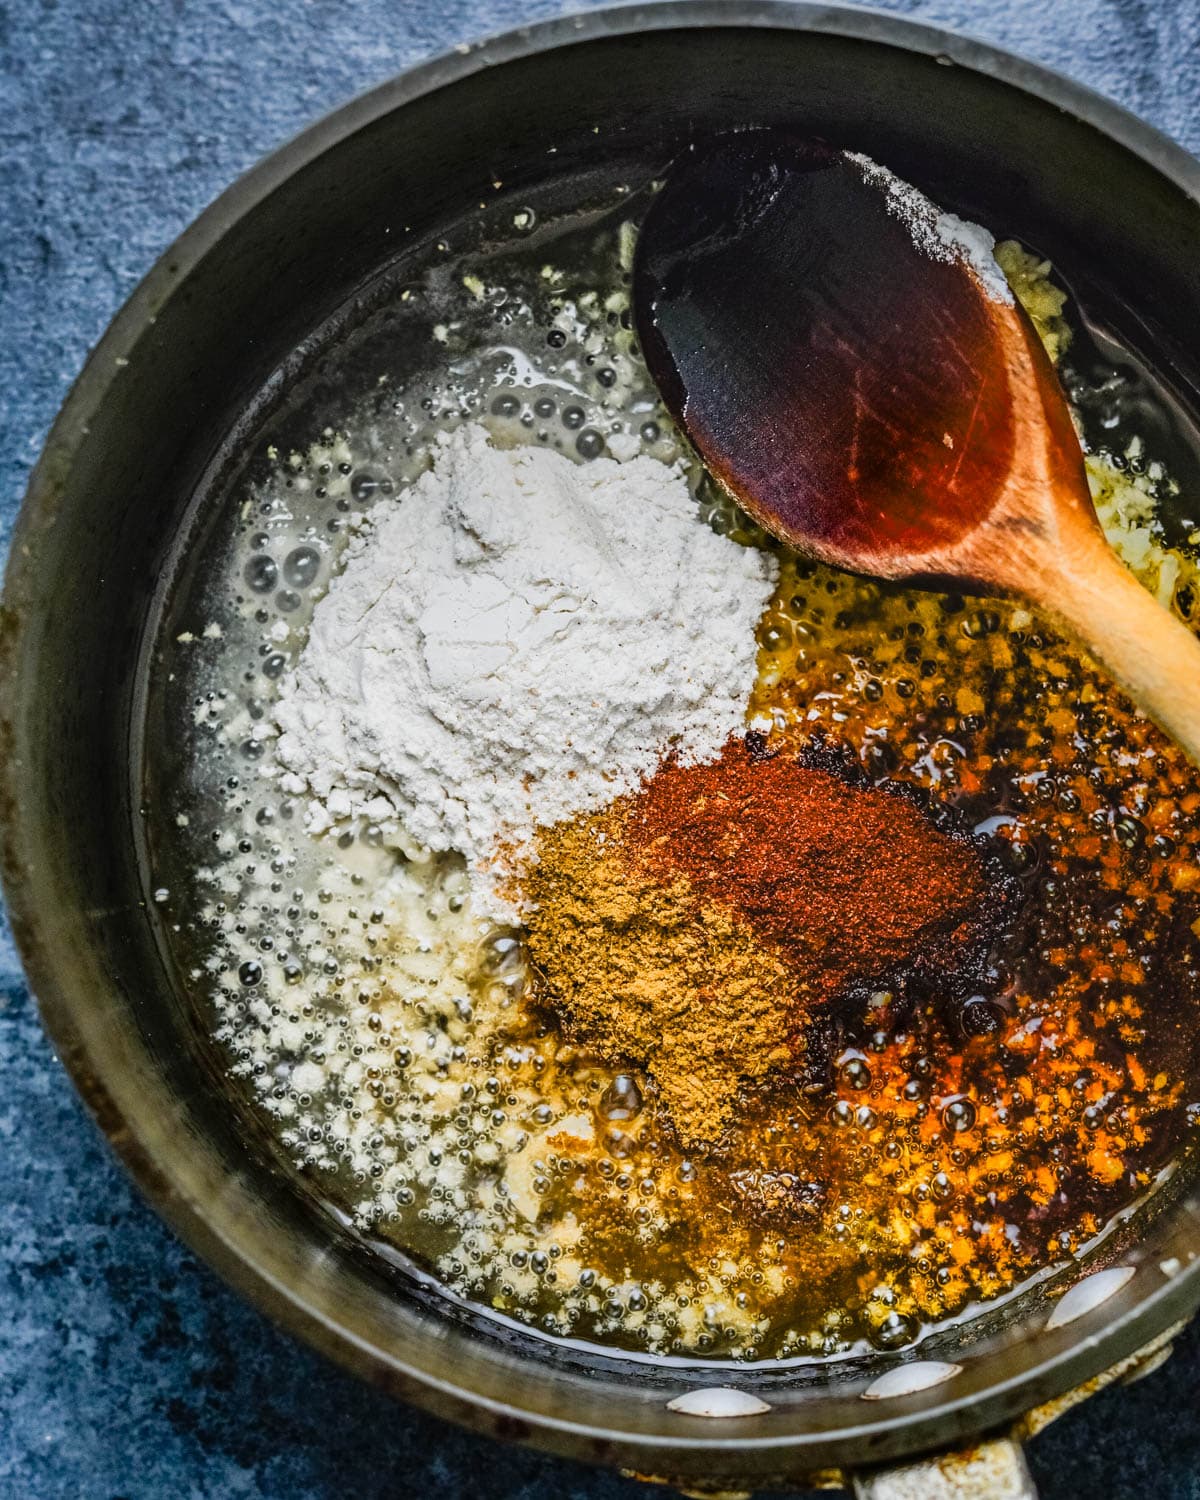 Blooming the spices in hot oil and adding flour.